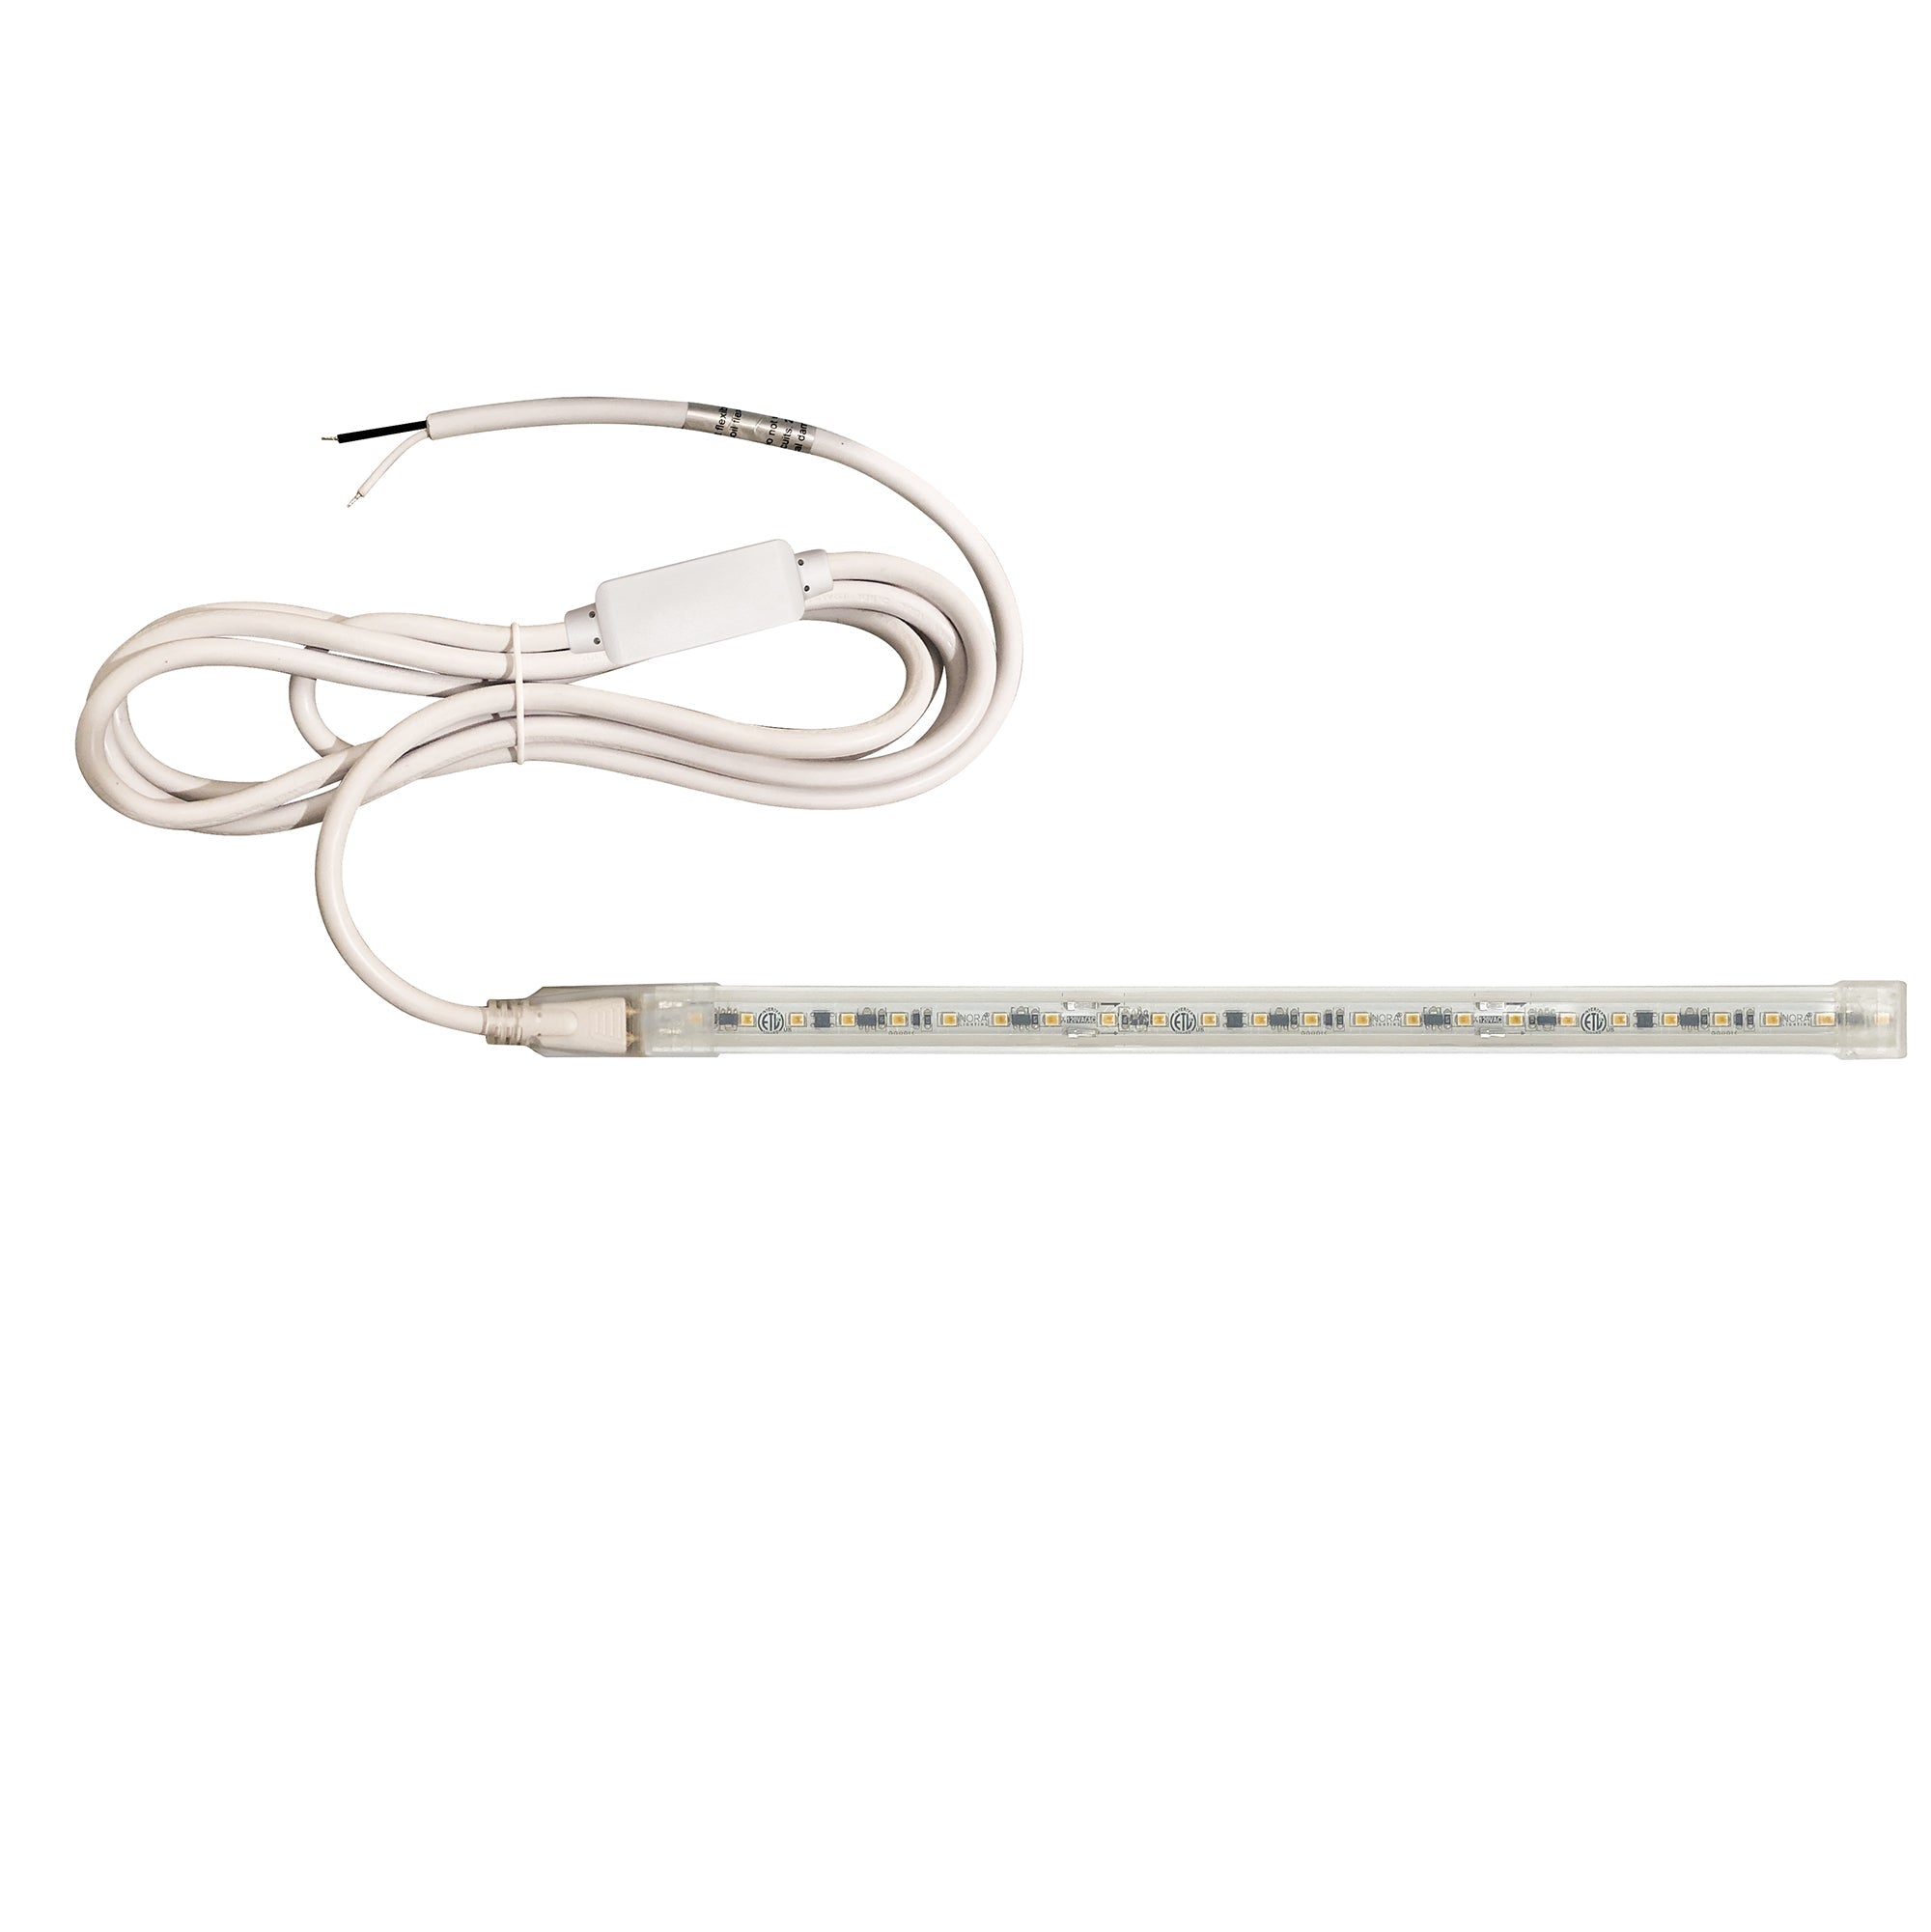 Nora Lighting NUTP13-W81-12-940/HWSP - Accent / Undercabinet - Custom Cut 81-ft 120V Continuous LED Tape Light, 330lm / 3.6W per foot, 4000K, w/ Mounting Clips and 8' Hardwired Power Cord w/ Surge Protector